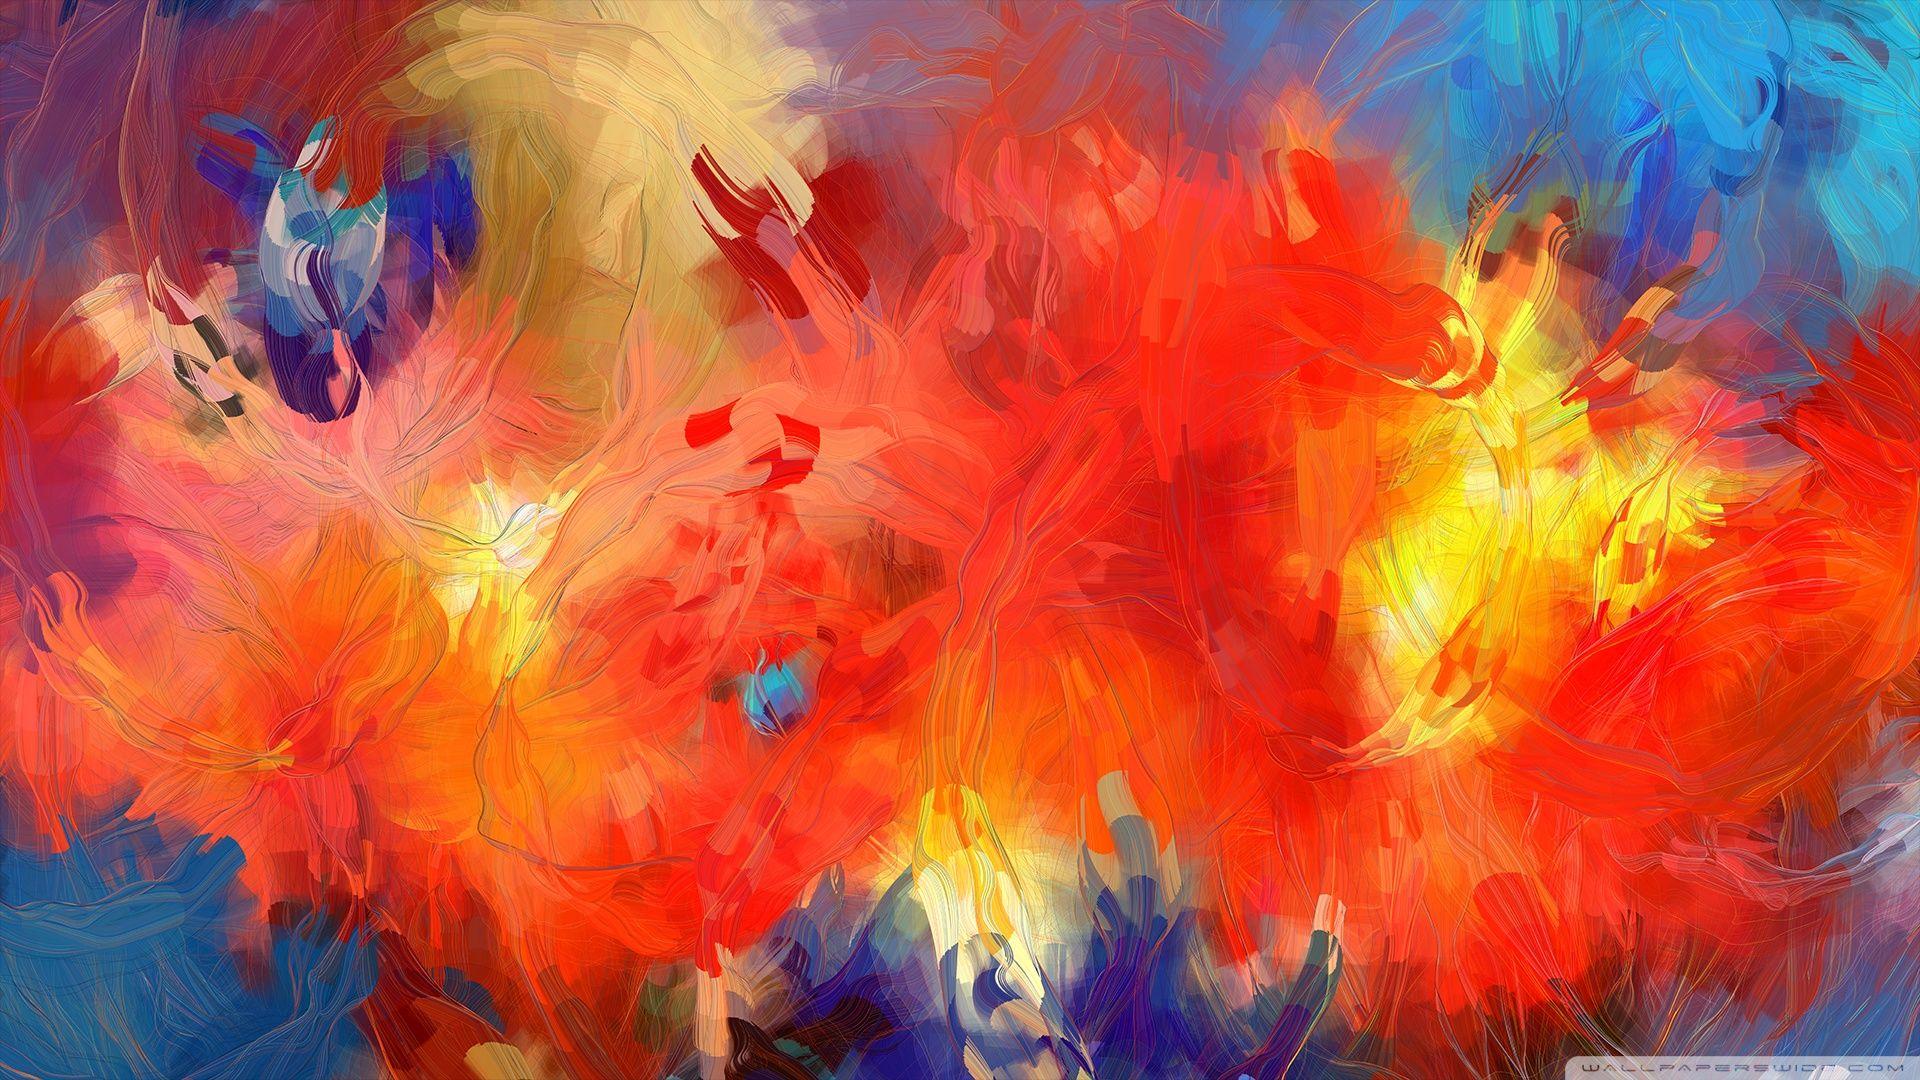 Famous Abstract Art Paintings Wallpaper Free Desktop. I HD Image